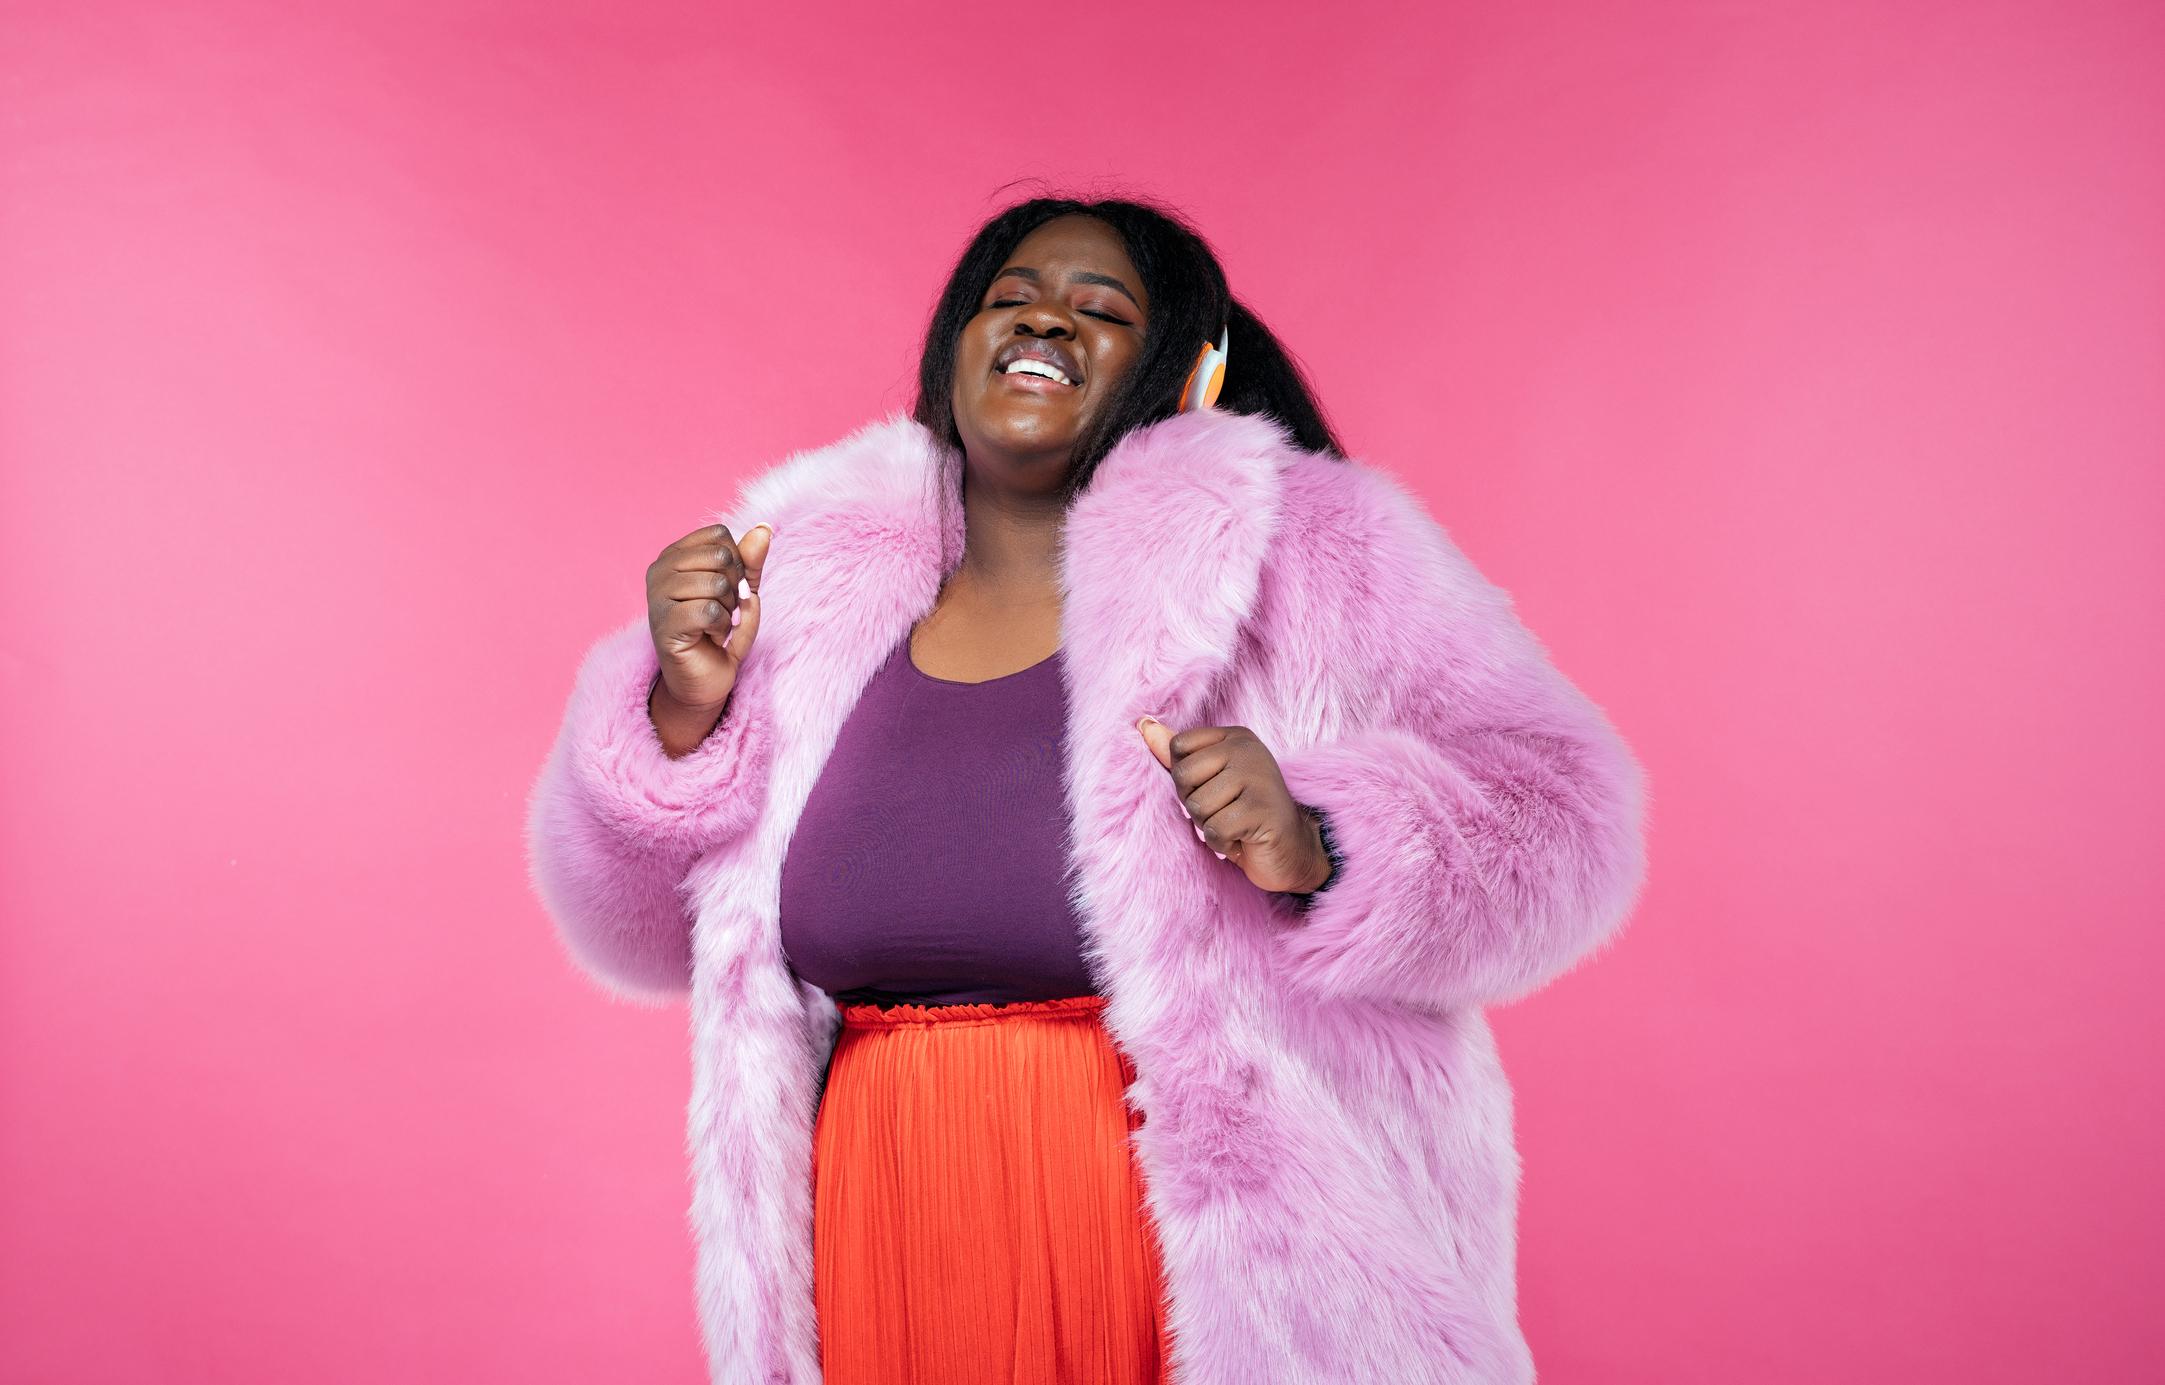  Female plus size model wearing a pink fur coat  against a dark pink background. 